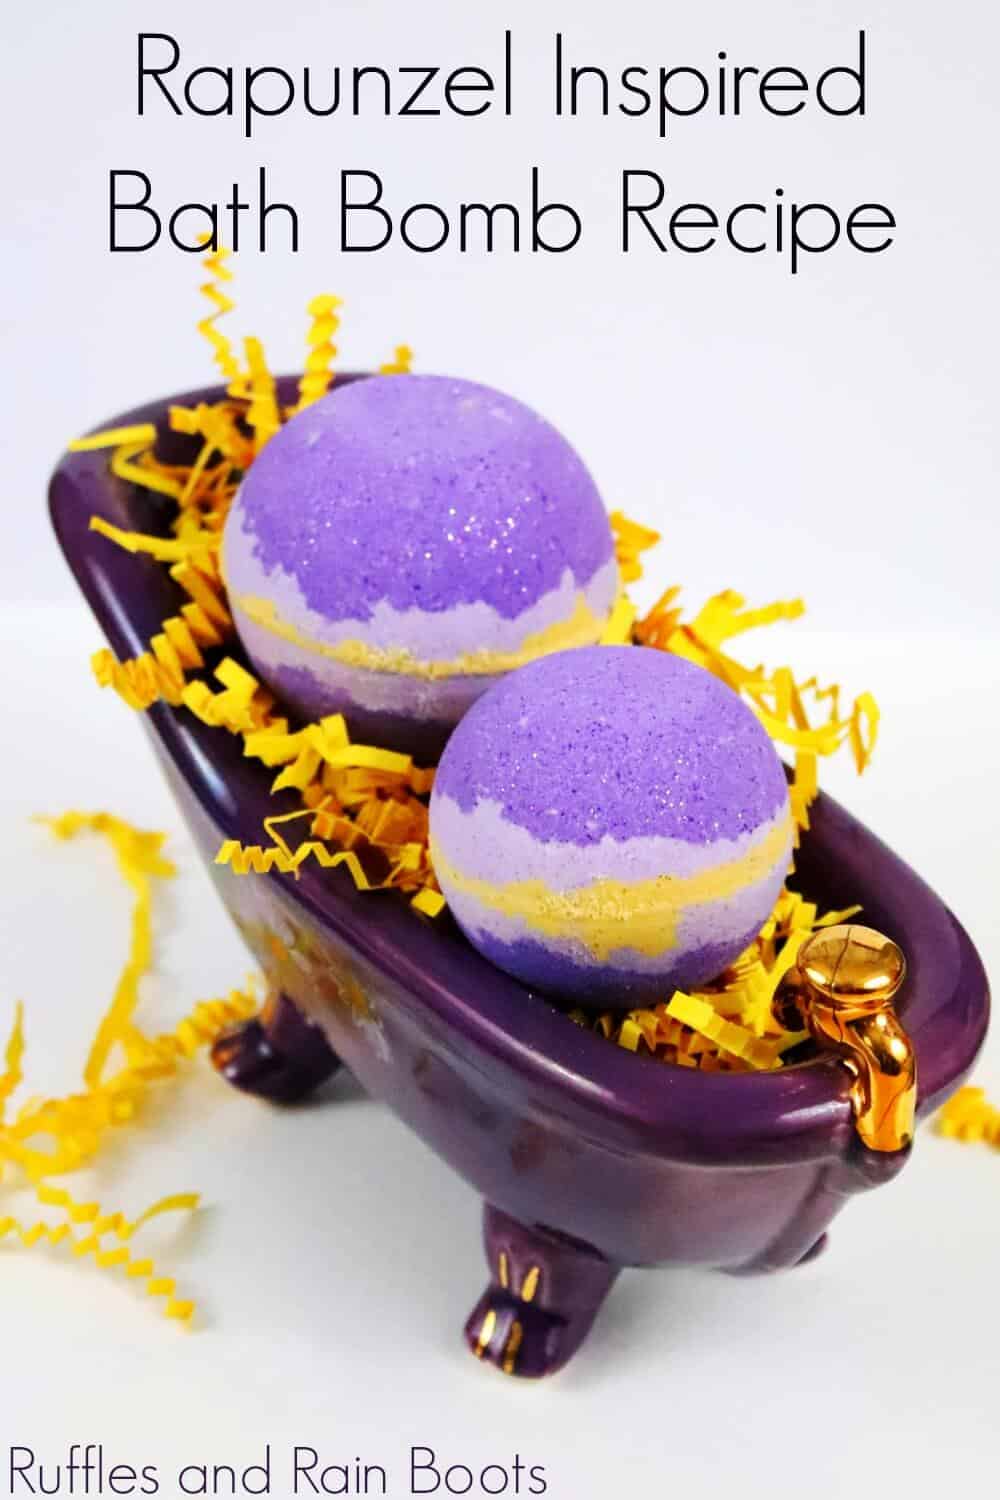 bath bombs in tiny tub on white background with text which reads Rapunzel inspired bath bomb recipe